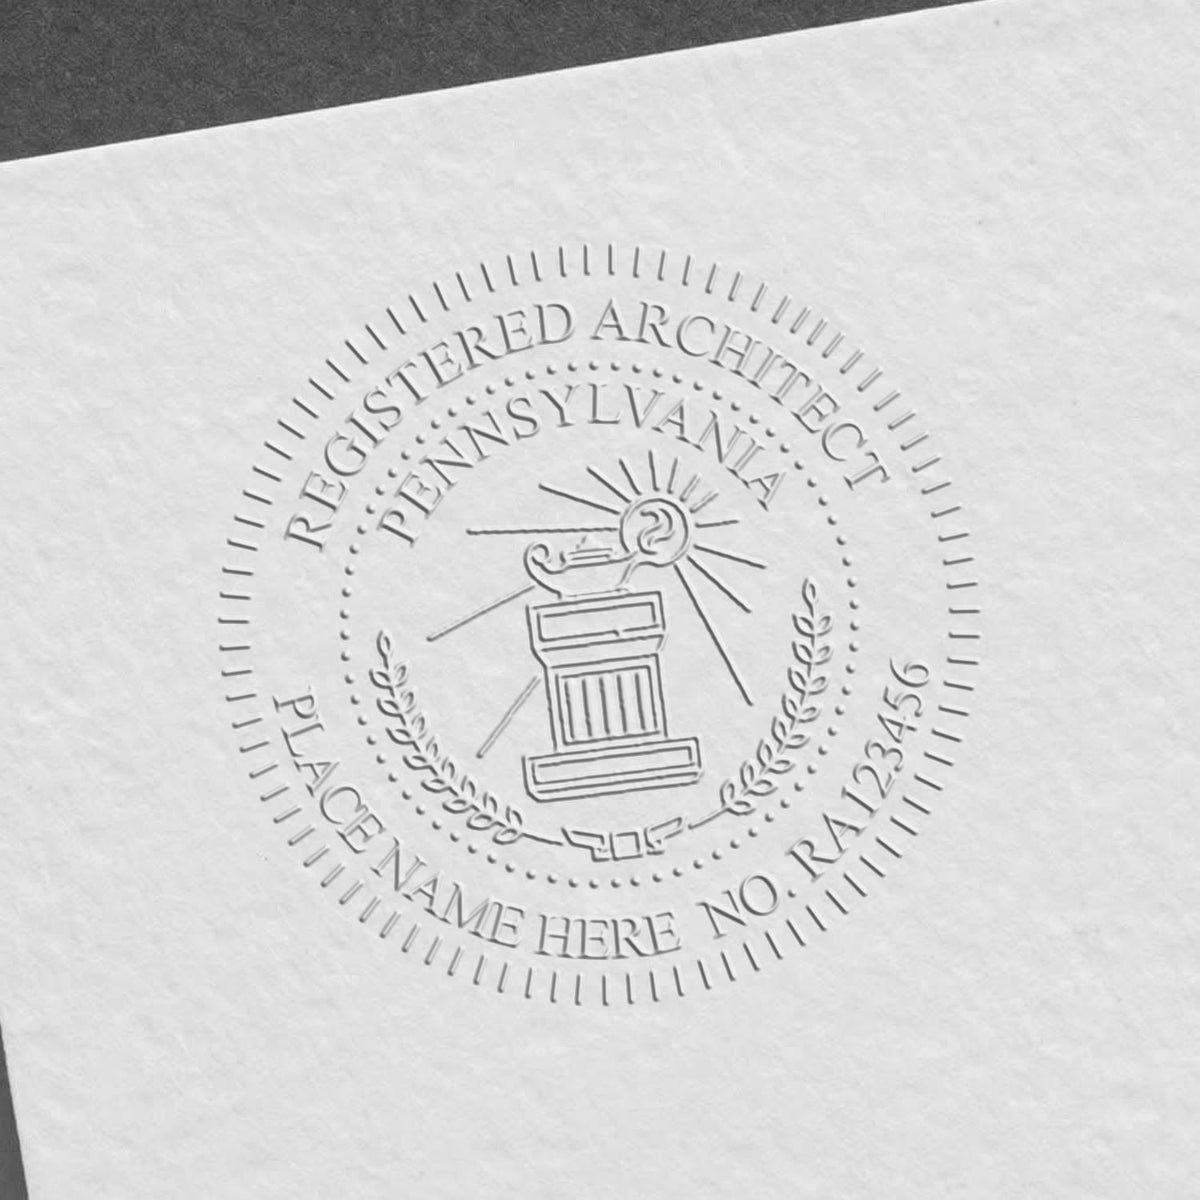 The State of Pennsylvania Architectural Seal Embosser stamp impression comes to life with a crisp, detailed photo on paper - showcasing true professional quality.